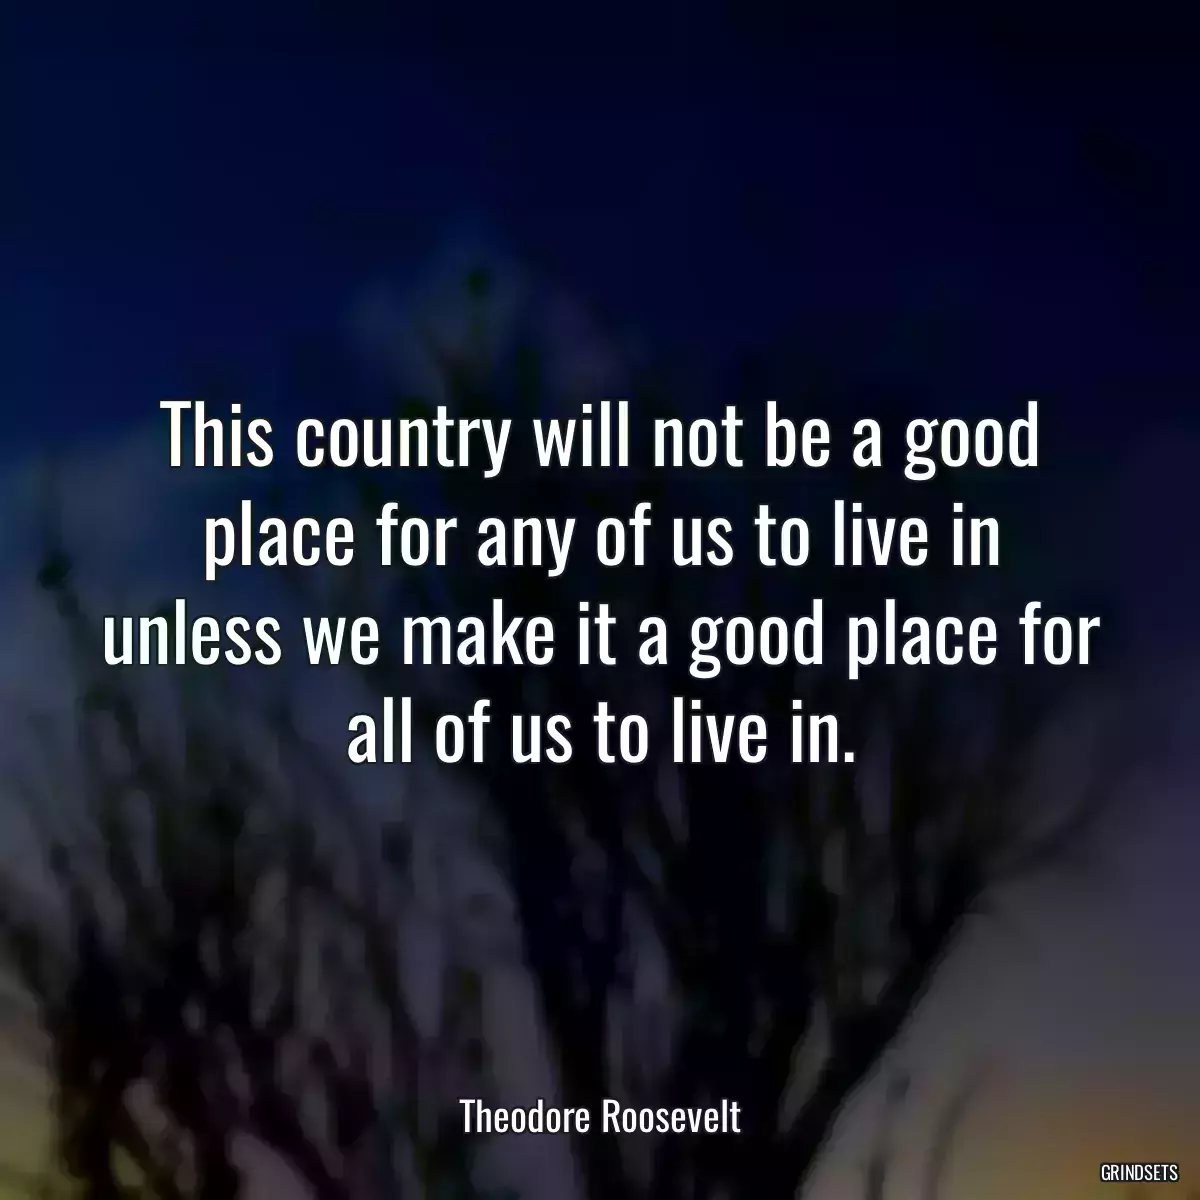 This country will not be a good place for any of us to live in unless we make it a good place for all of us to live in.